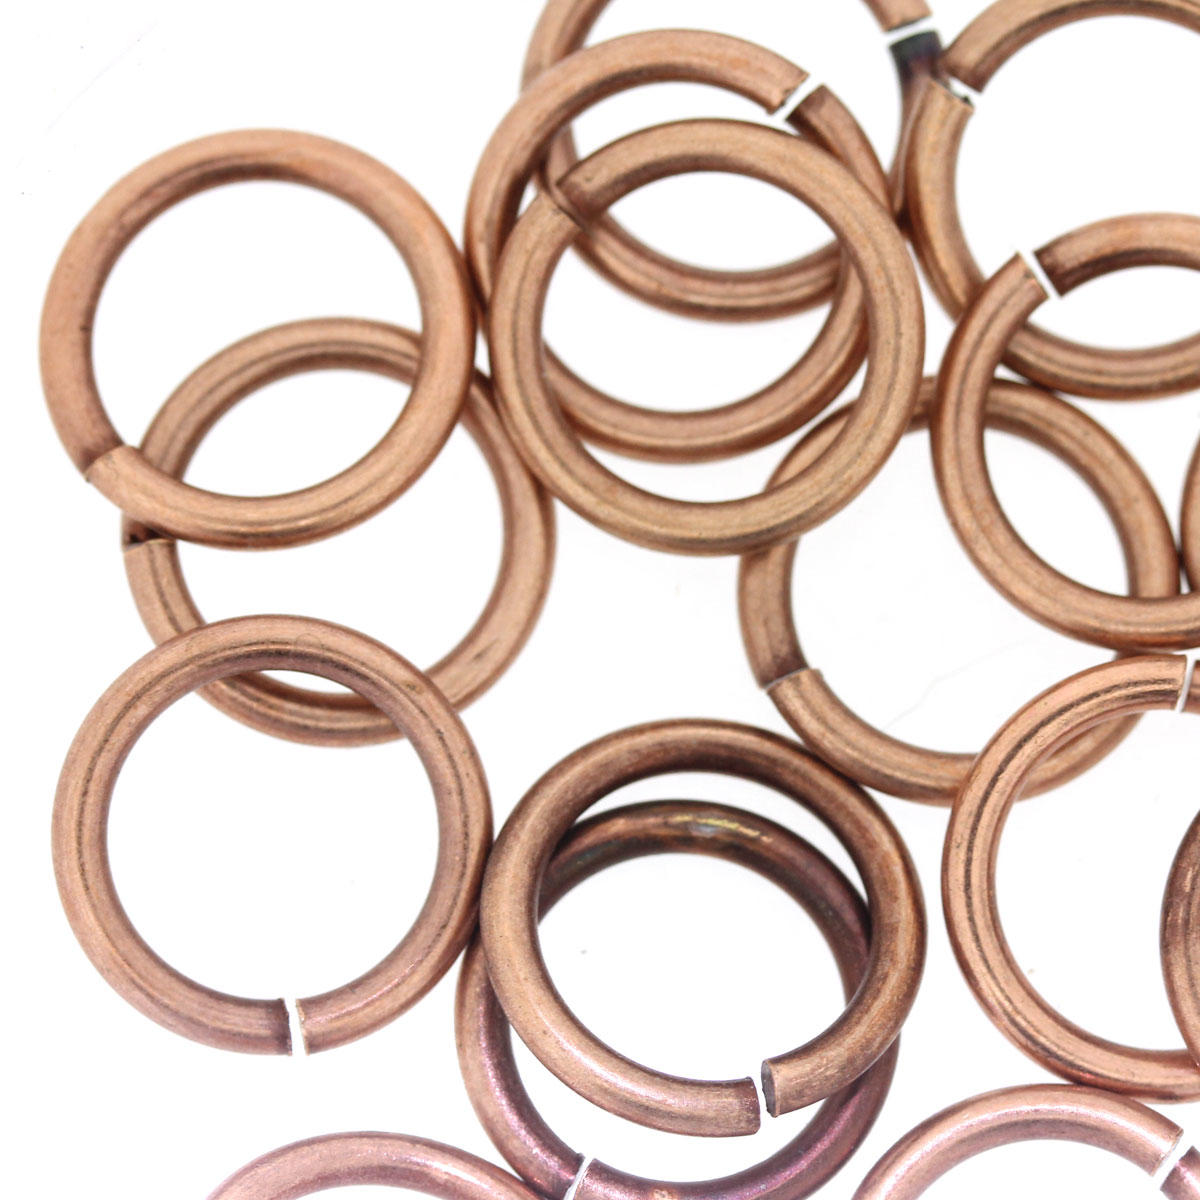 Antique Copper 14mm Thick Jump-ring